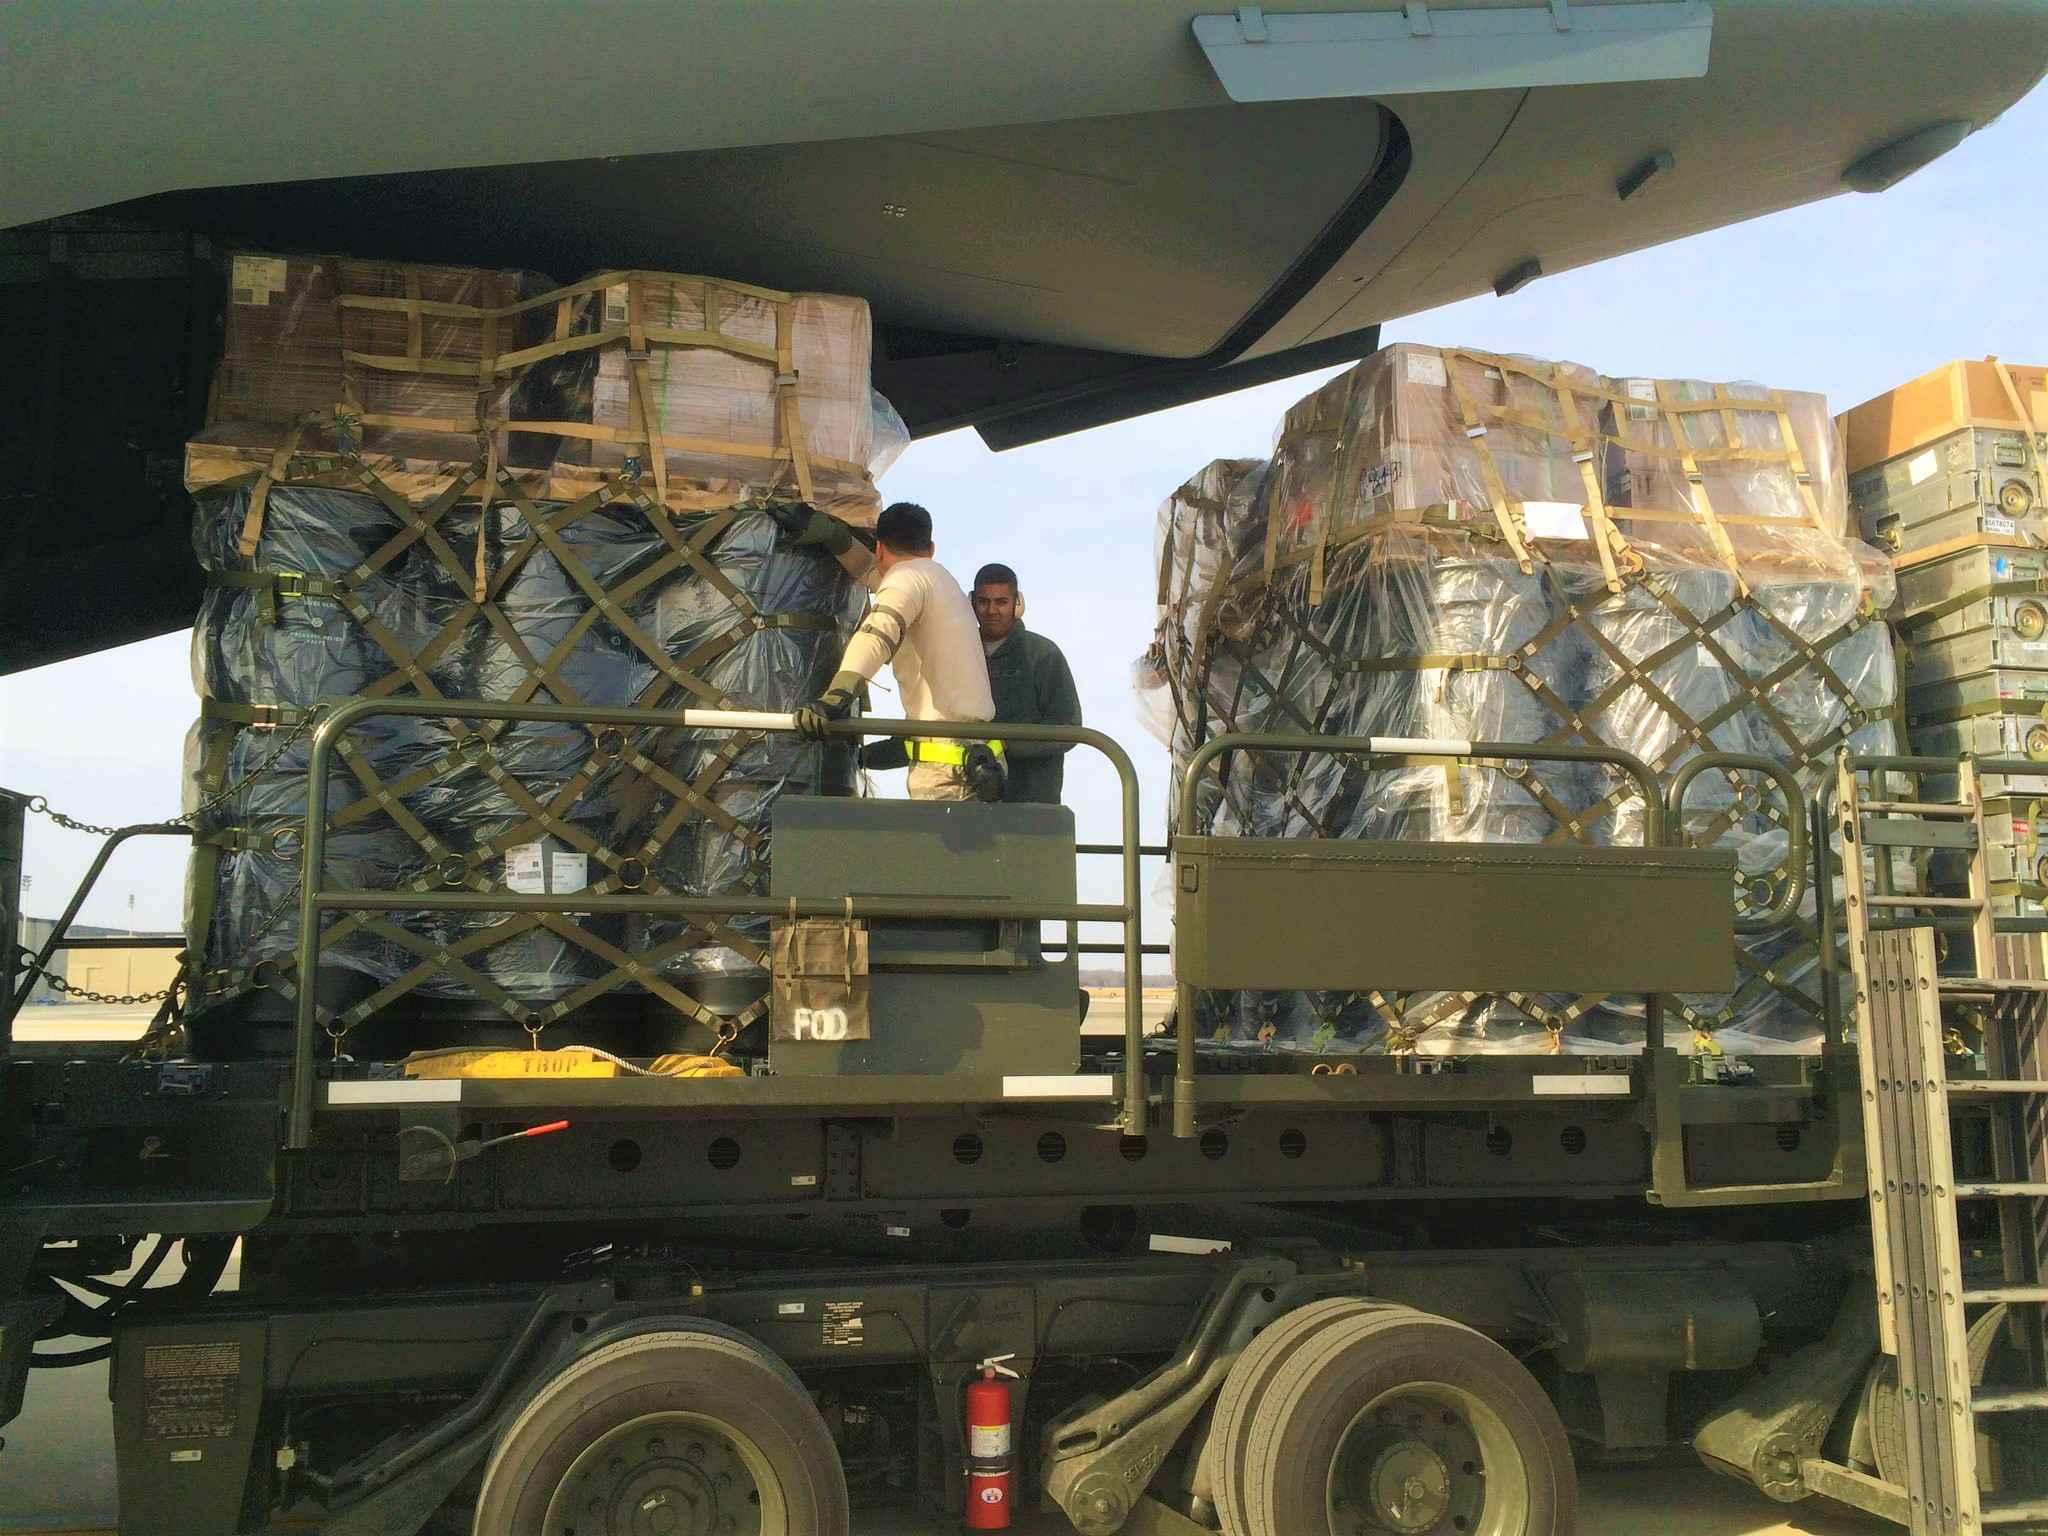 Military freight being loaded onto a plane